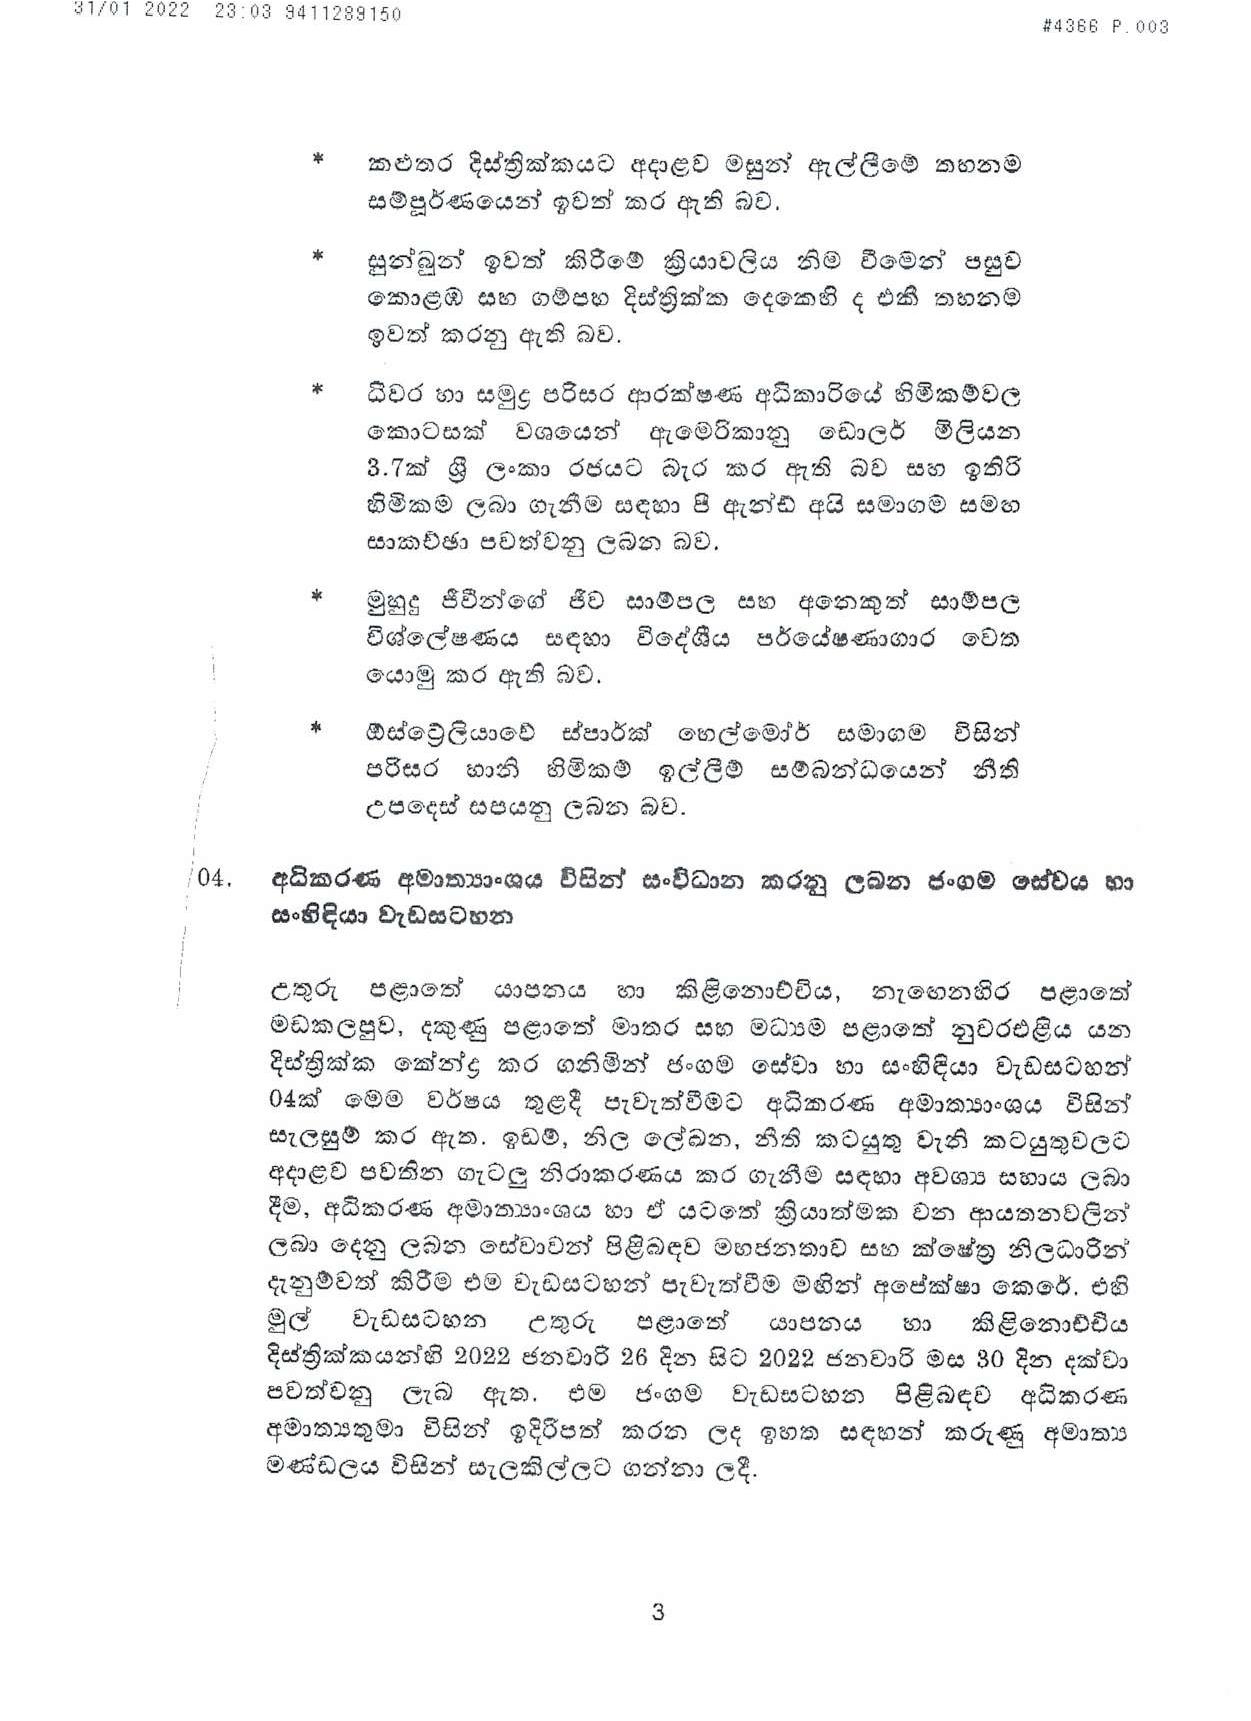 Cabinet Decision on 31.01.2022 page 003